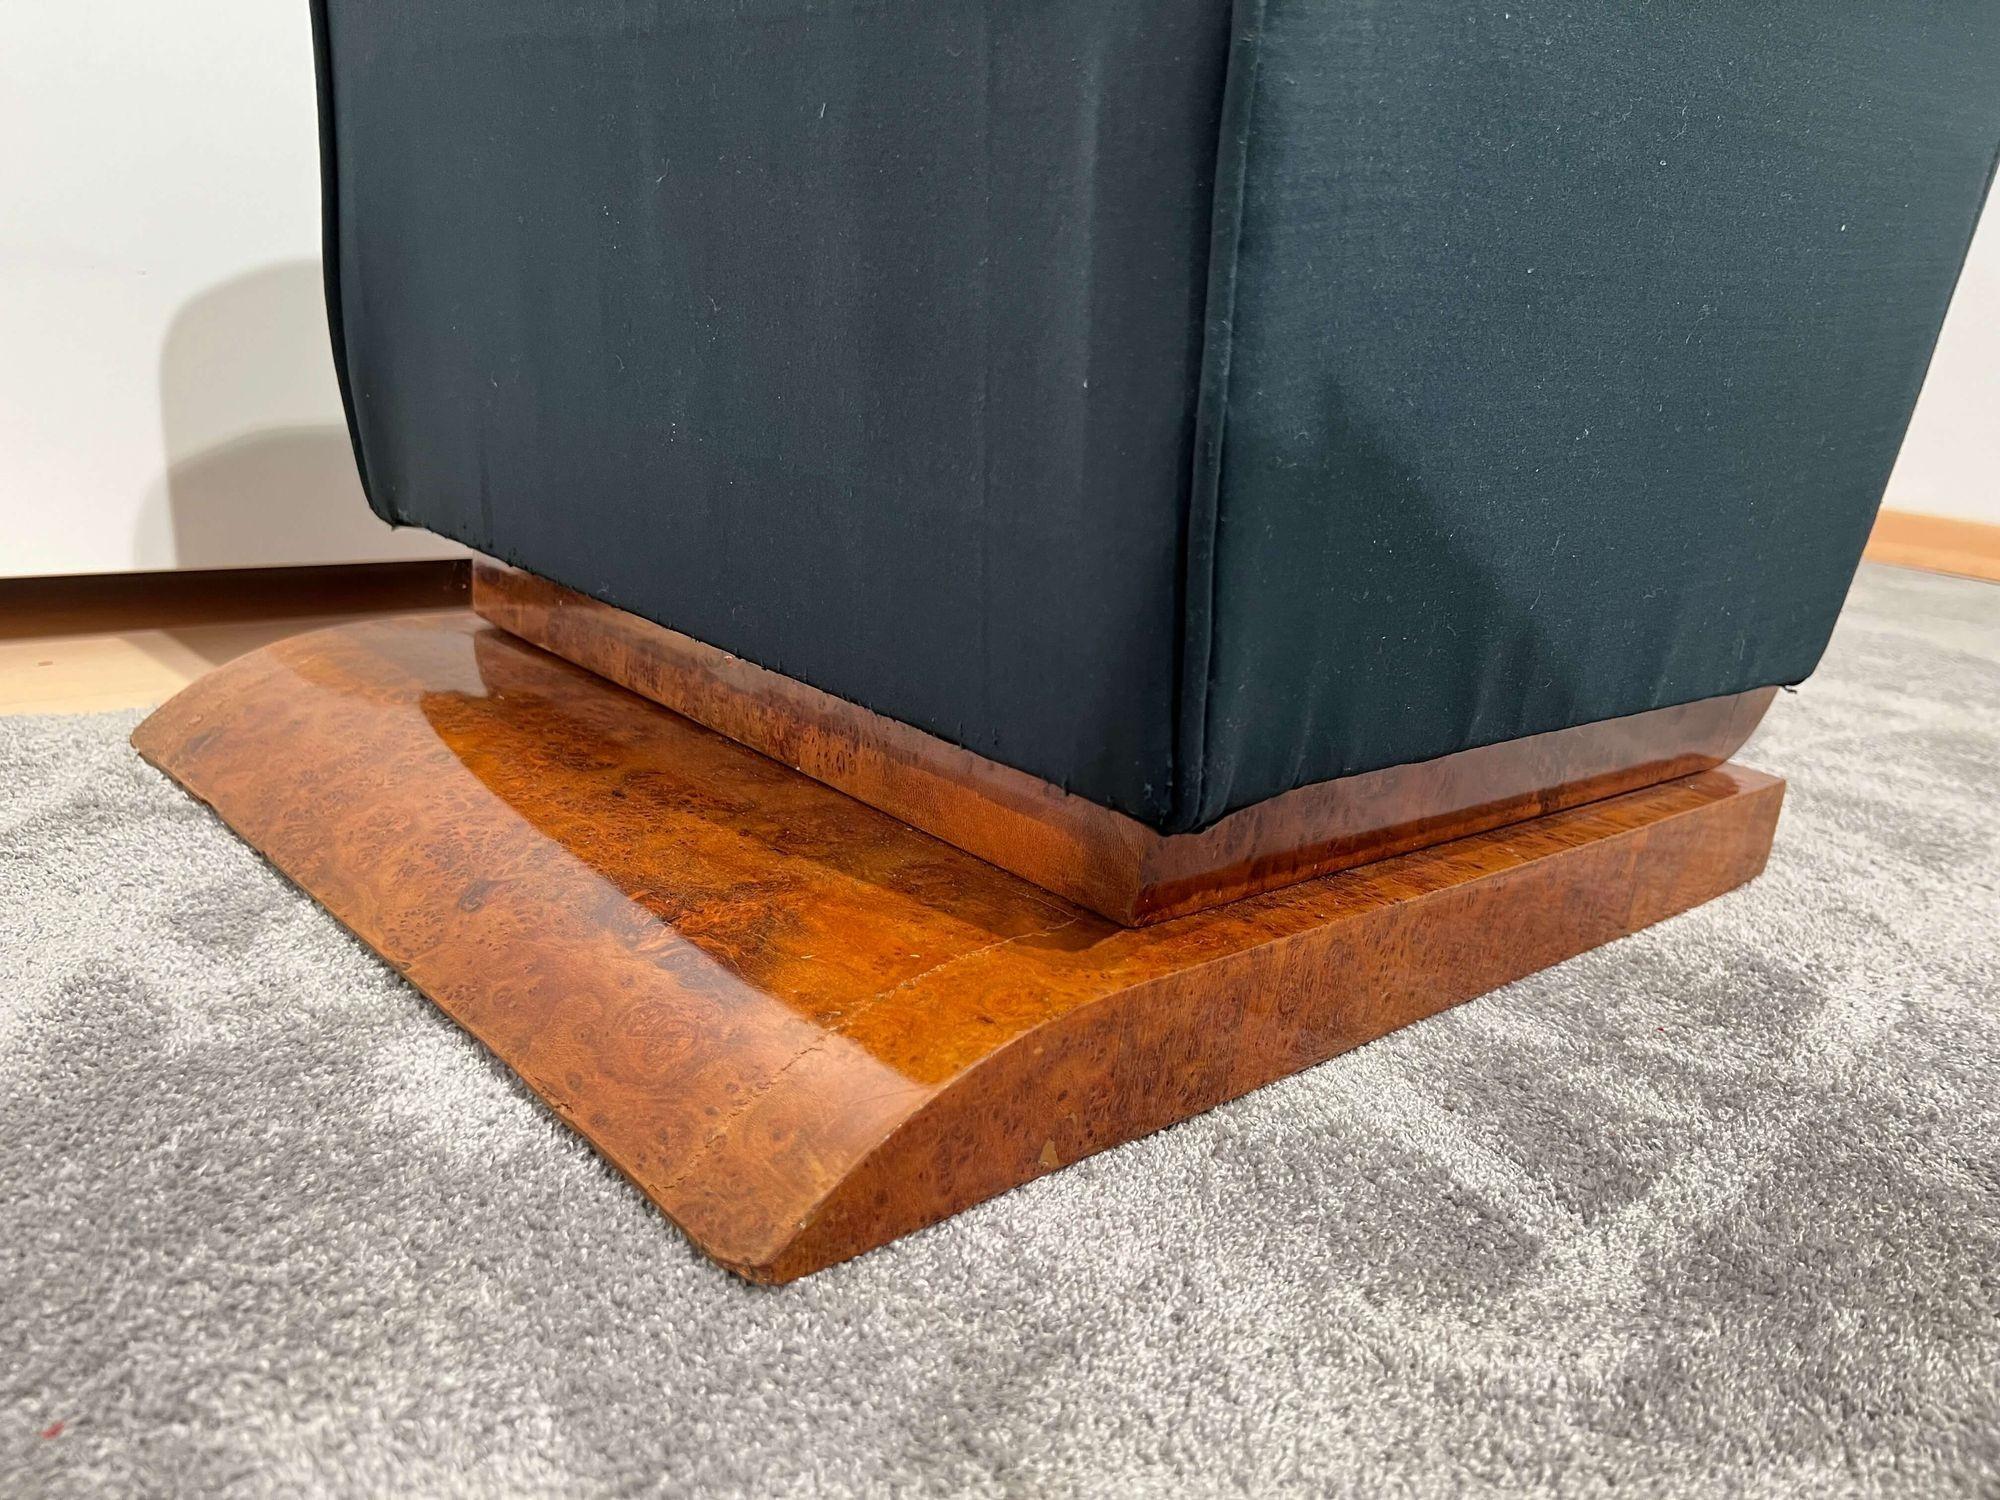 Beautiful original art deco stool from France ab our 1930.
Amboyna roots wood veneered and polished. Covered with anthracite fabric and border finishing.
Dimensions: H 38 cm x B 57,5 cm x T 41,5 cm.